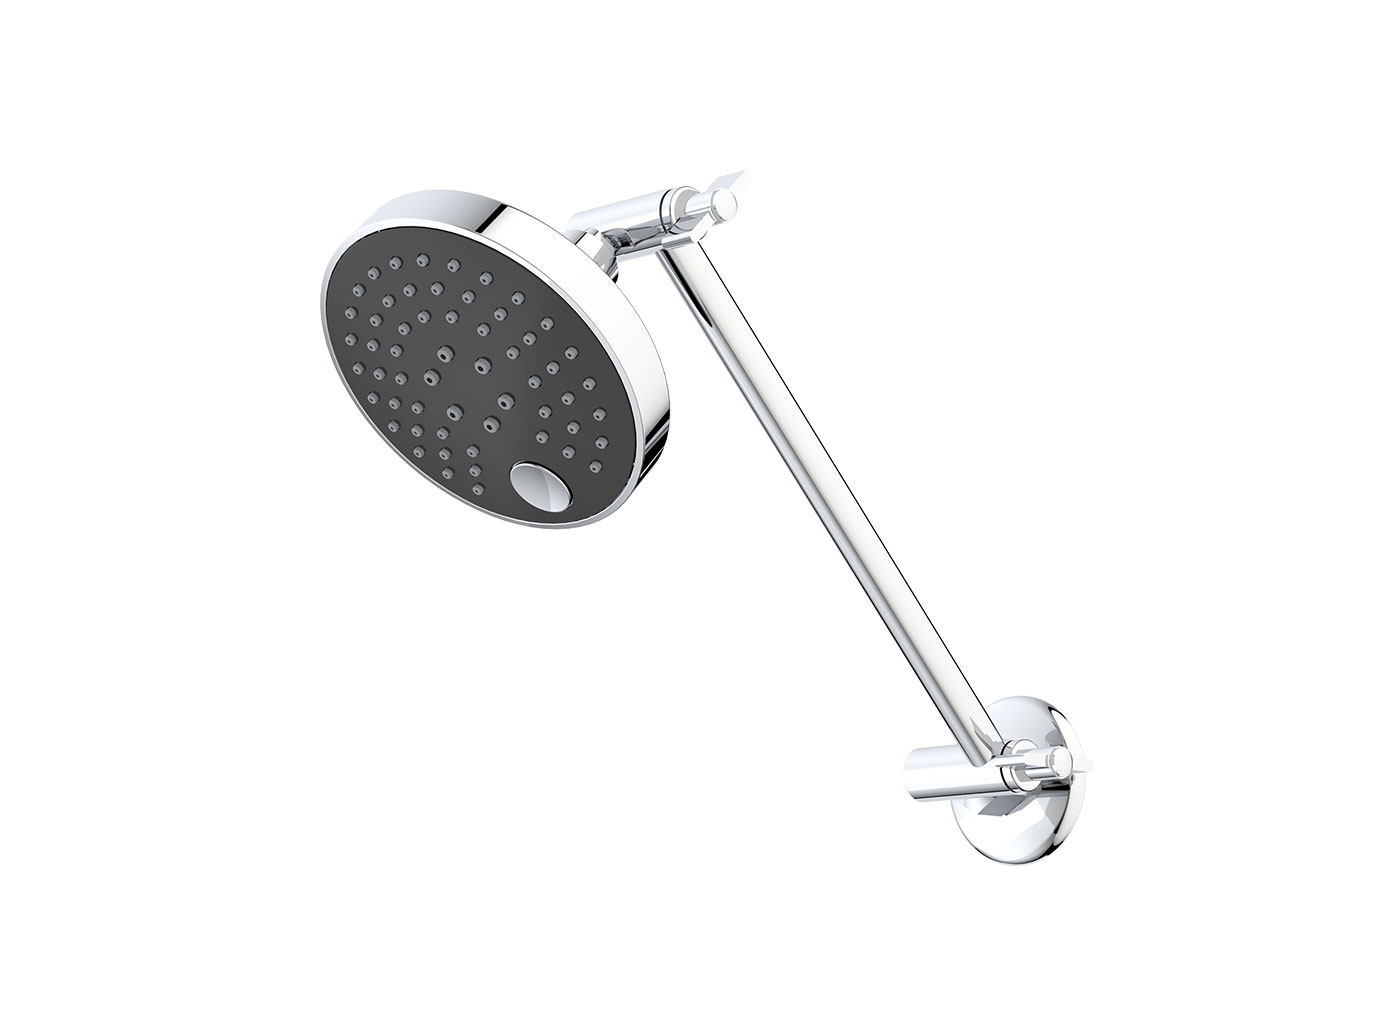 Add a striking accent of black or white in the bathroom with Caroma Pin. Its refined